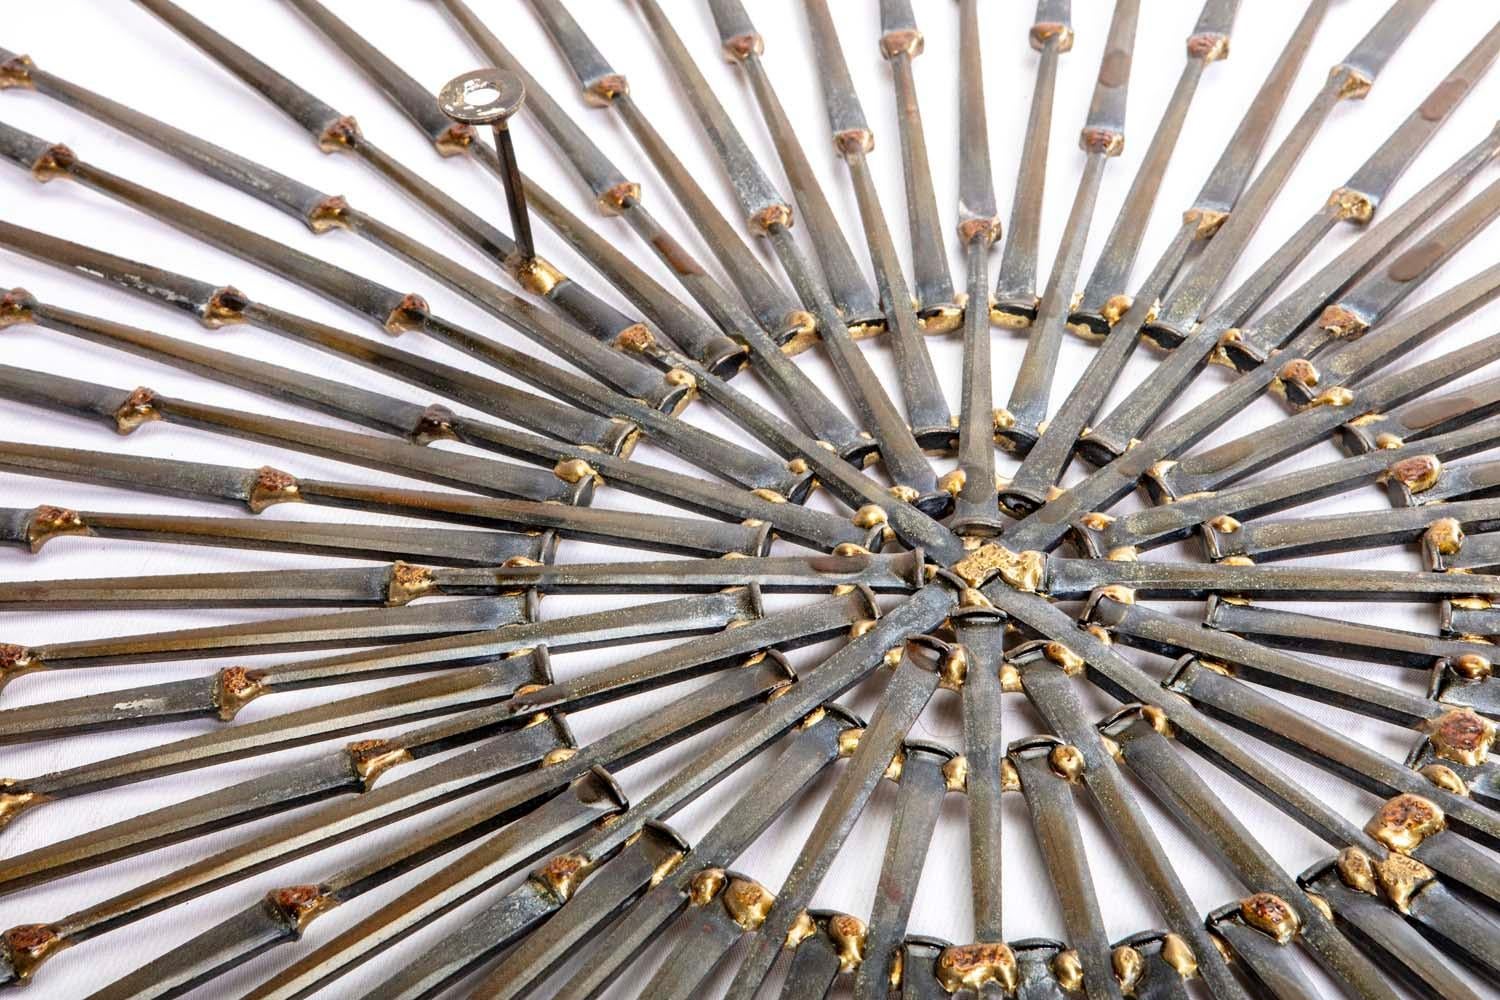 Brutalist sunburst in the style of William Bowie.
William Bowie was a sculpture artist based in New York City from 1954 to 1994. He is best known for his works using welded gold leaf steel nails. As a contemporary of Harry Bertoia, Curtis Jere, and